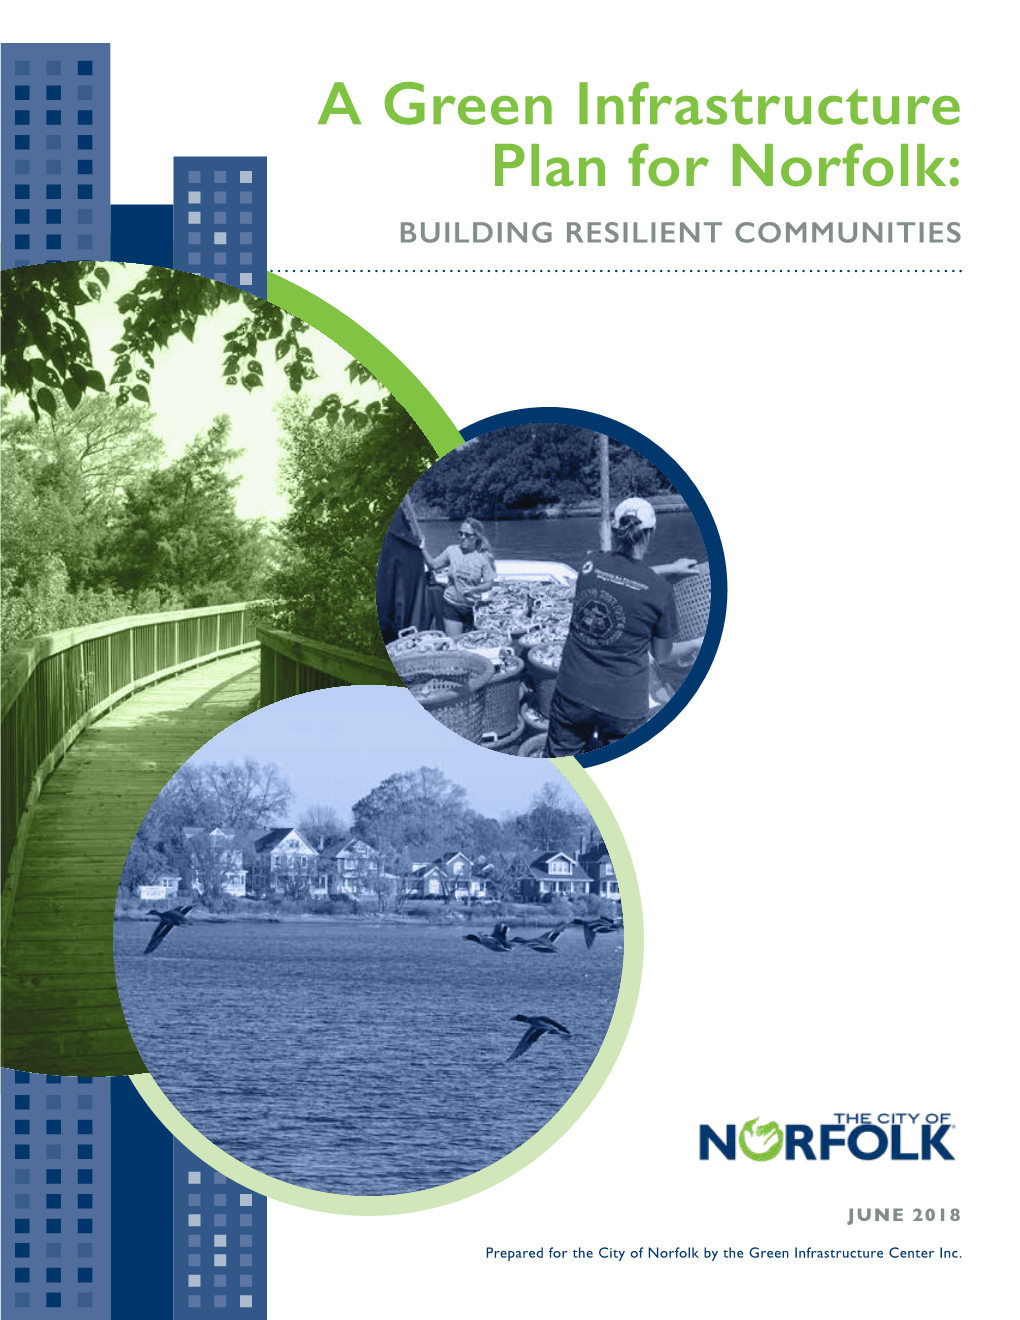 A Green Infrastructure Plan for Norfolk: BUILDING RESILIENT COMMUNITIES